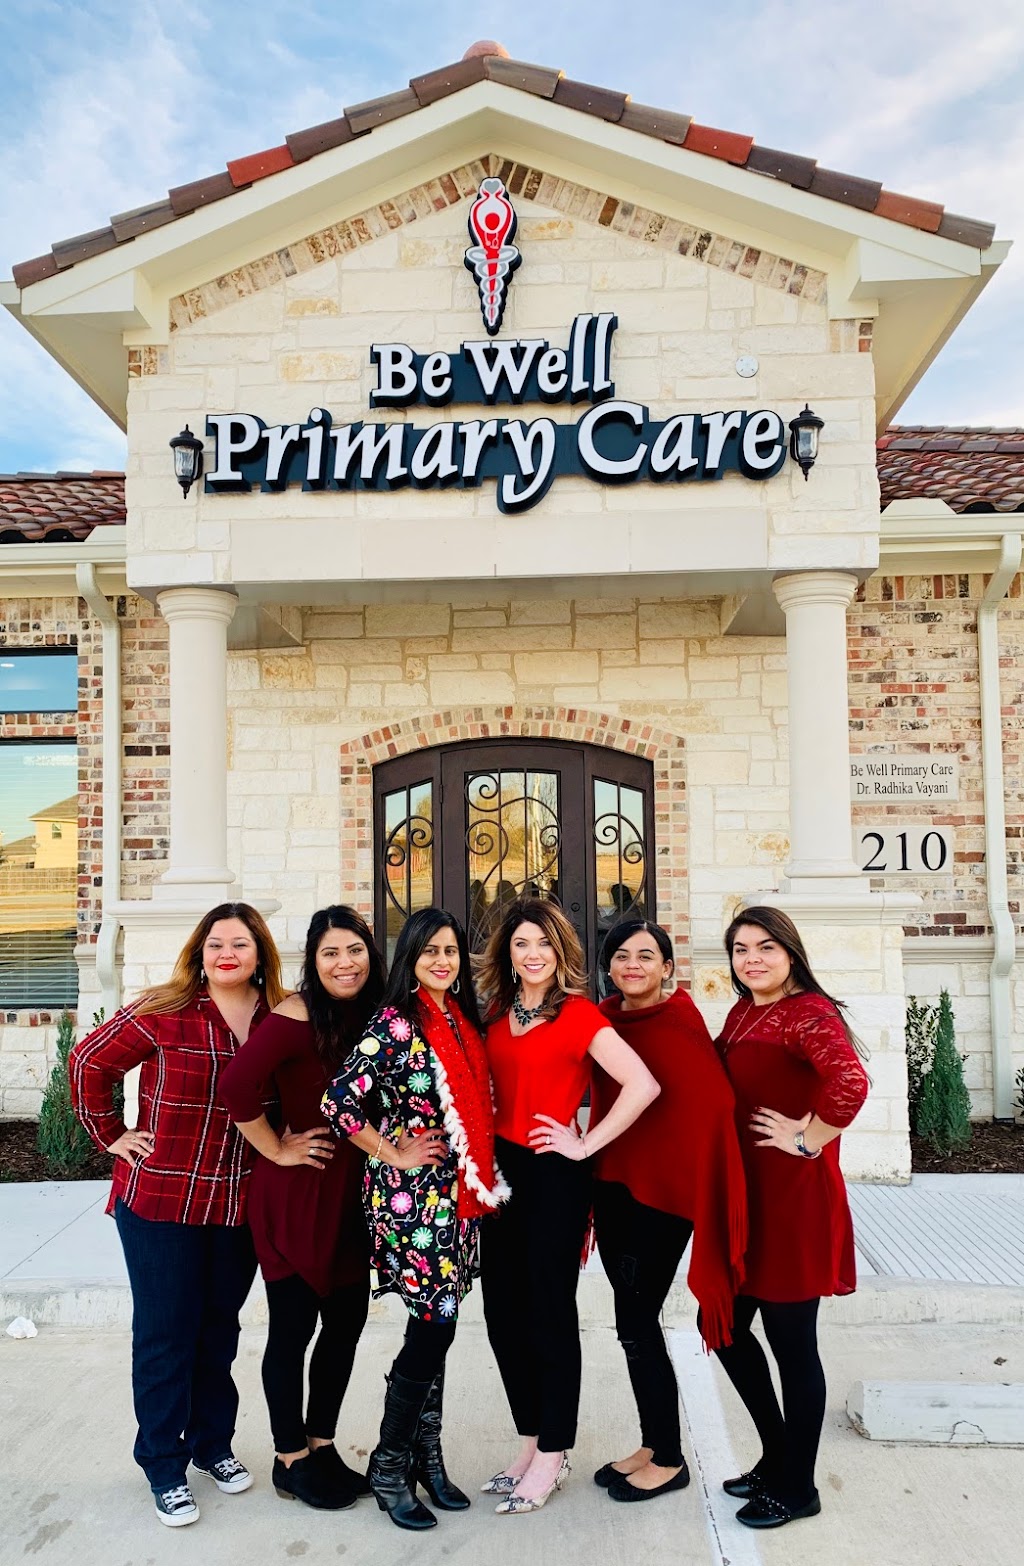 7d95e823f31d7339291feec00277f055 united states texas tarrant county fort worth north tarrant parkway 3800 be well primary care dr radhika vayani 682 593 6660